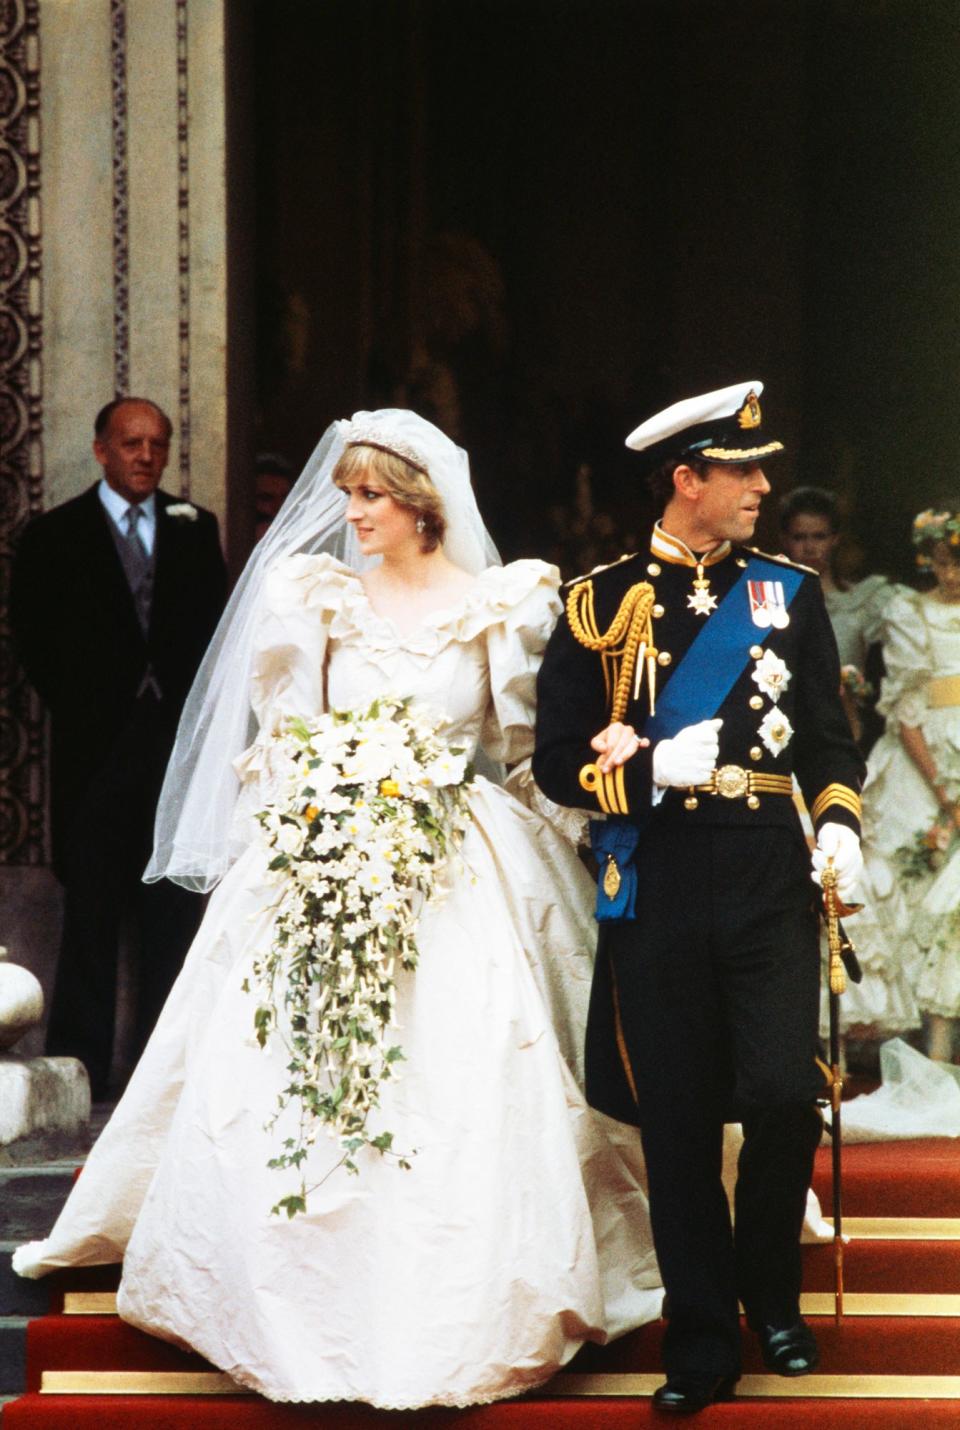 <h1 class="title">Prince Charles and Lady Diana Spencer</h1><cite class="credit">Photo: Getty Images</cite>